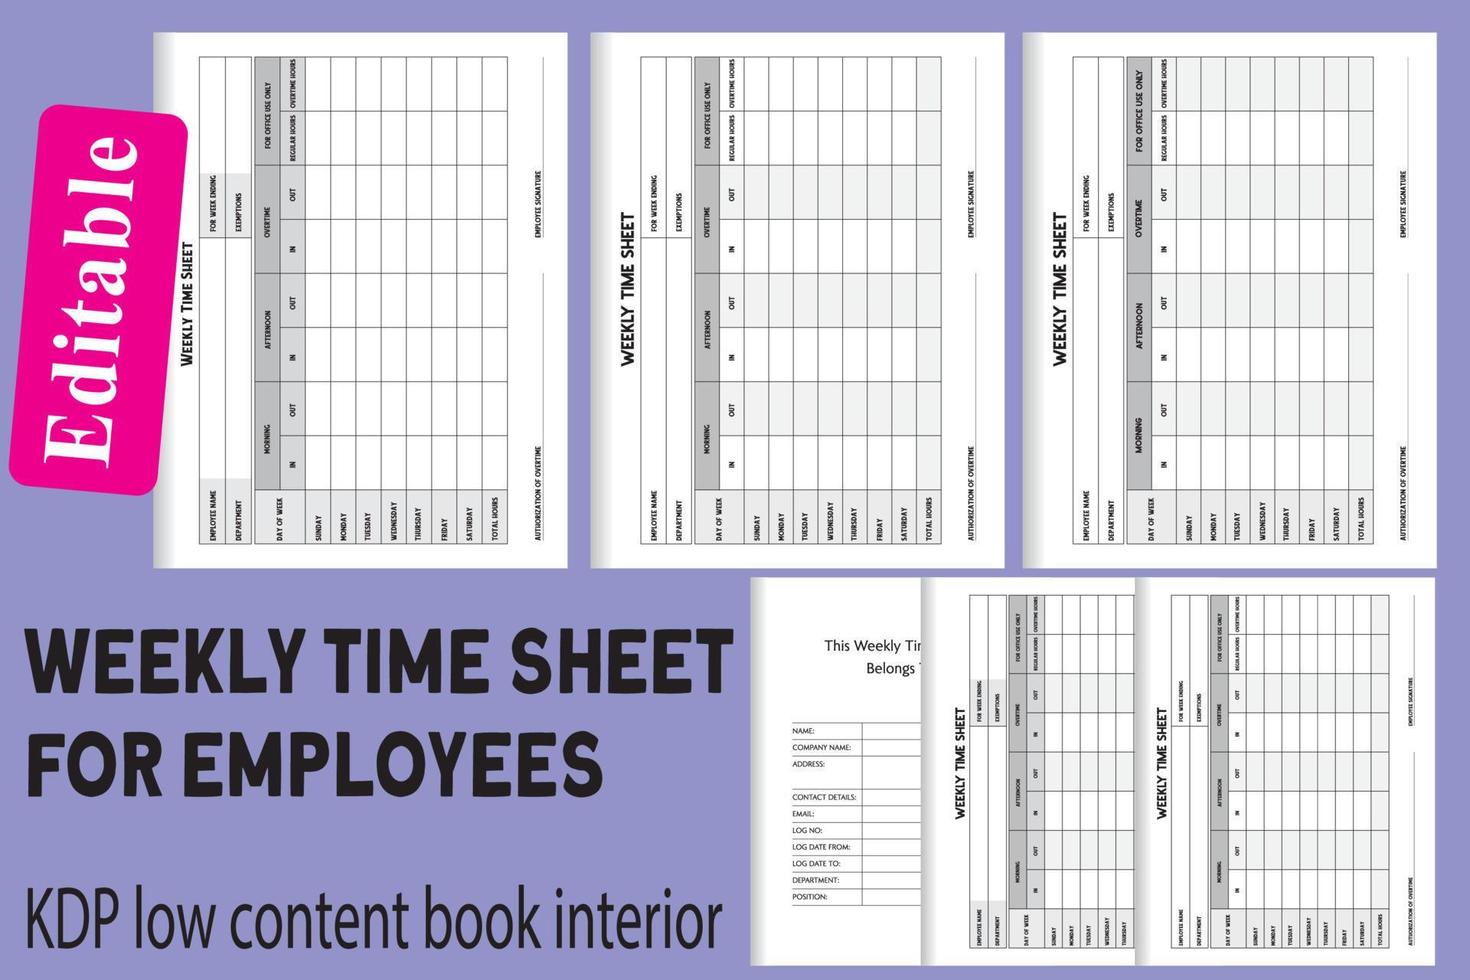 Weekly Time Sheet for employees vector